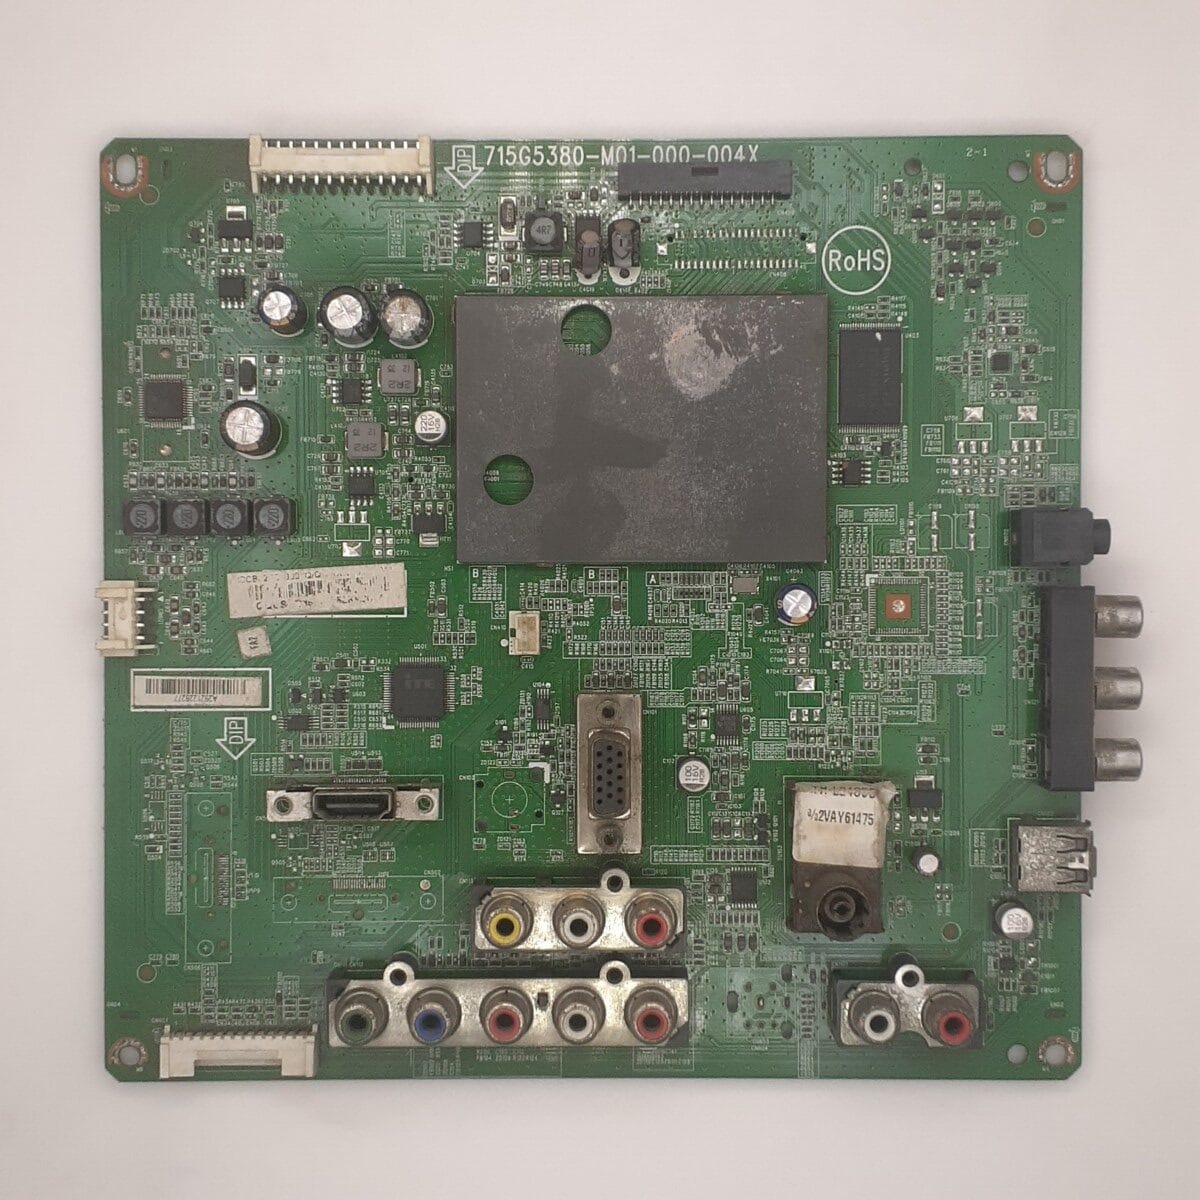 TH-L24C5D PANASONIC MOTHERBOARD FOR LED TV